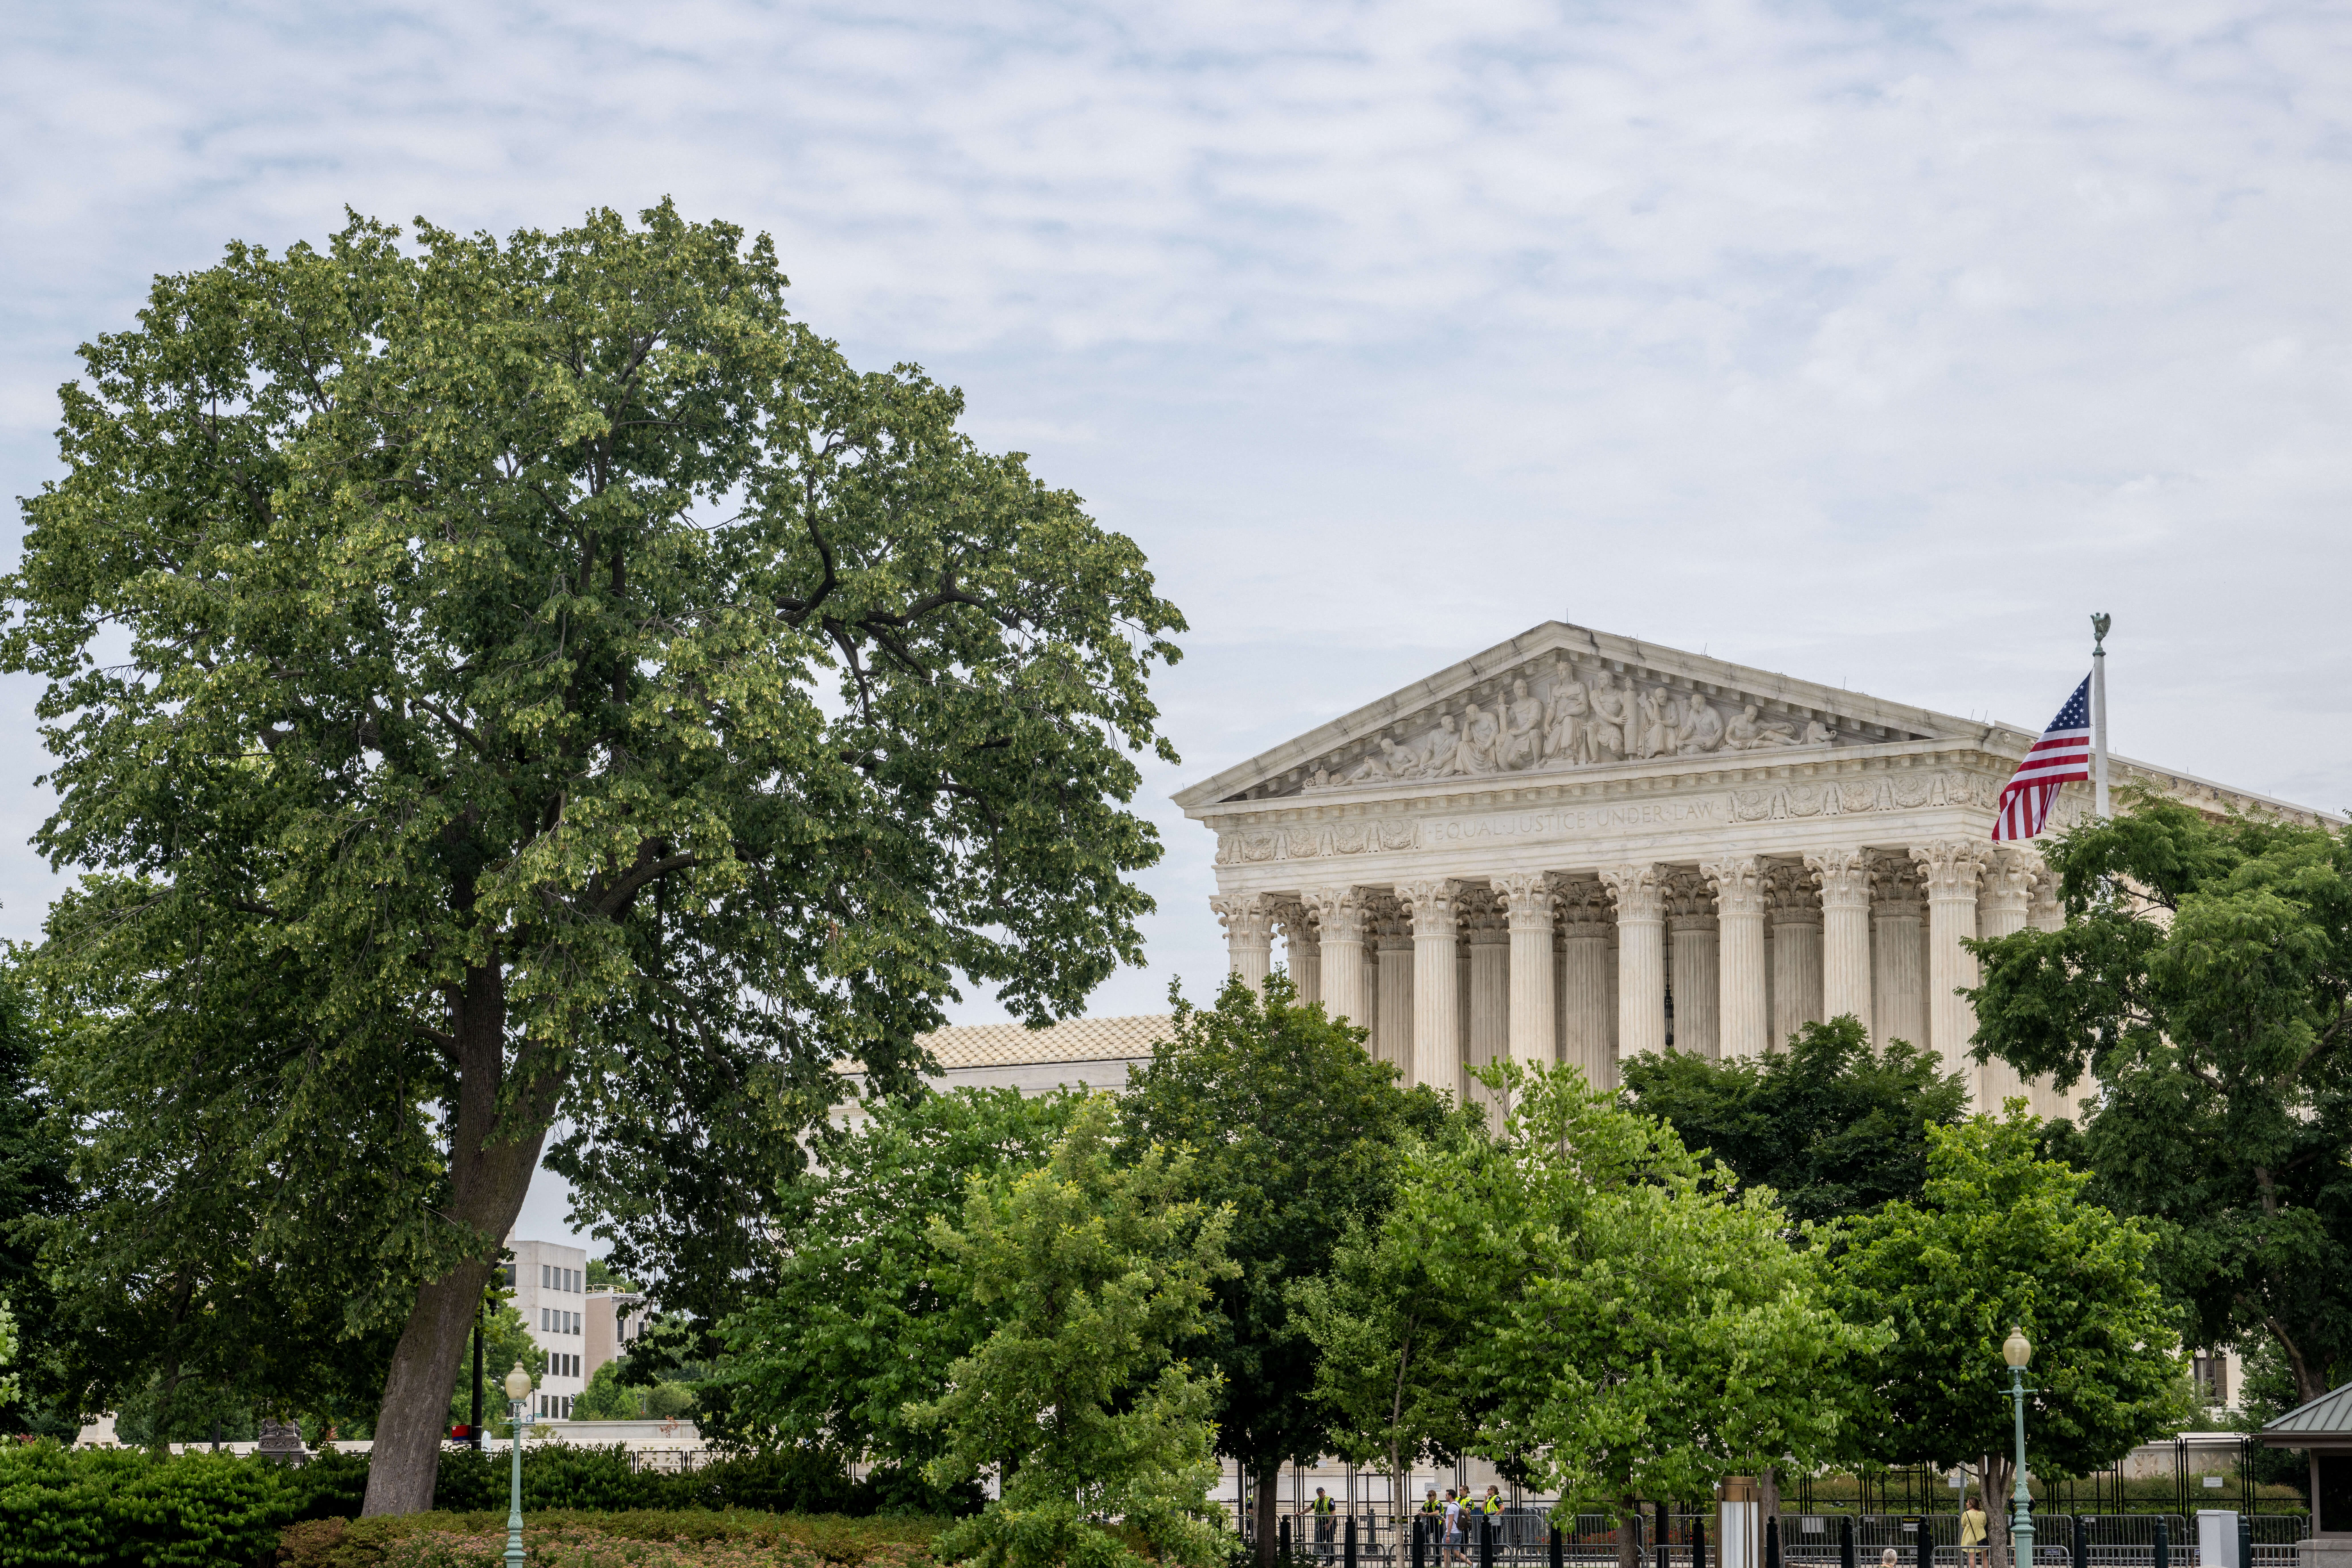 A view of the U.S. Supreme Court Building on June 21, 2022 in Washington, DC